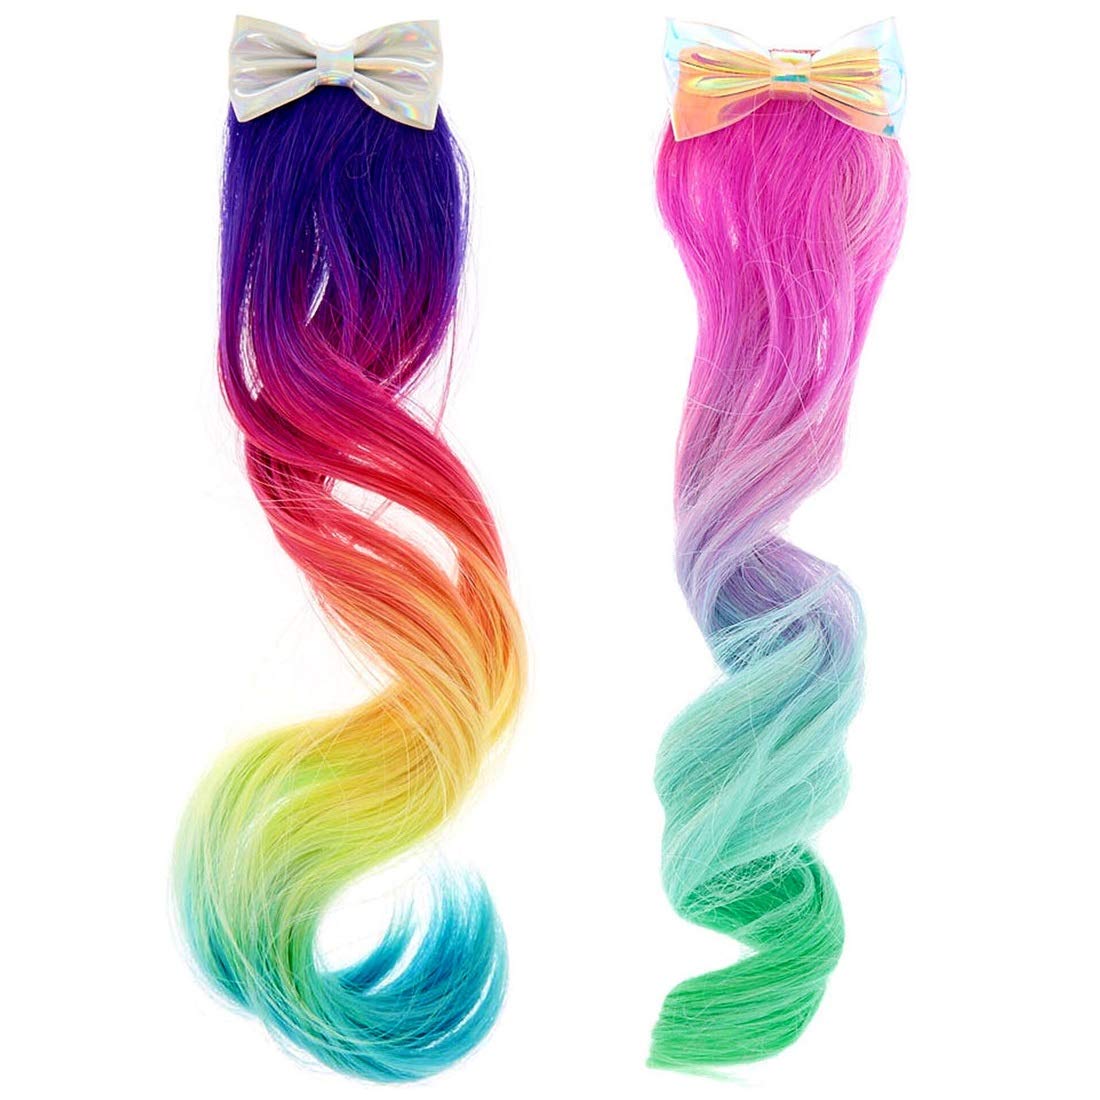 Curly Colored Hair Extensions for Kids Rainbow Ombre Ponytail Extension  Fake Hair Barrettes Party Hair Accessories 2 Pack 2 Pack-2